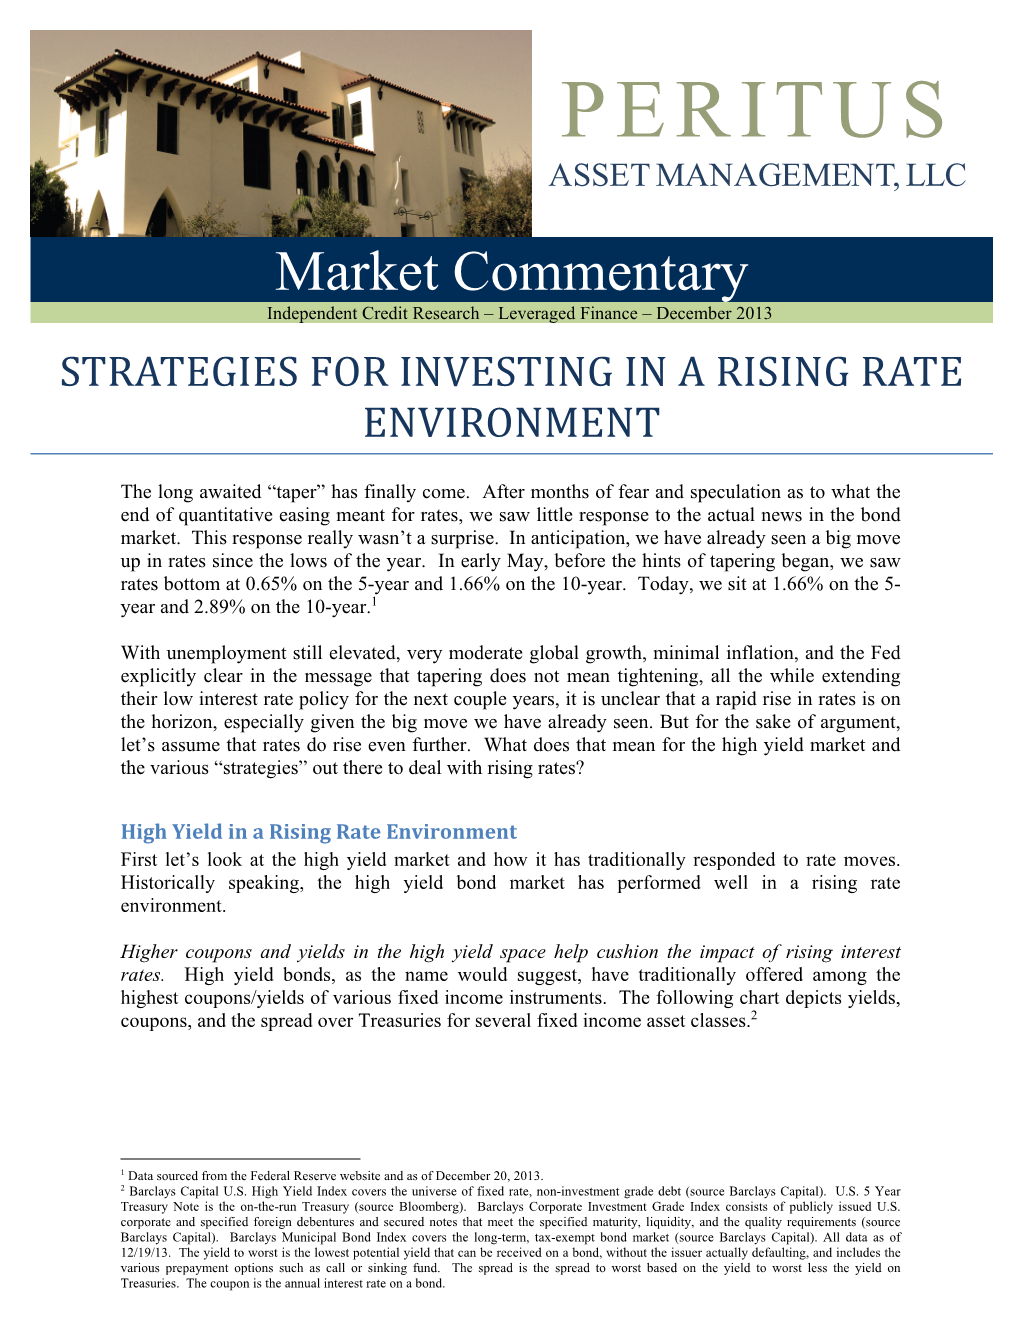 Strategies for Investing in a Rising Rate Environment